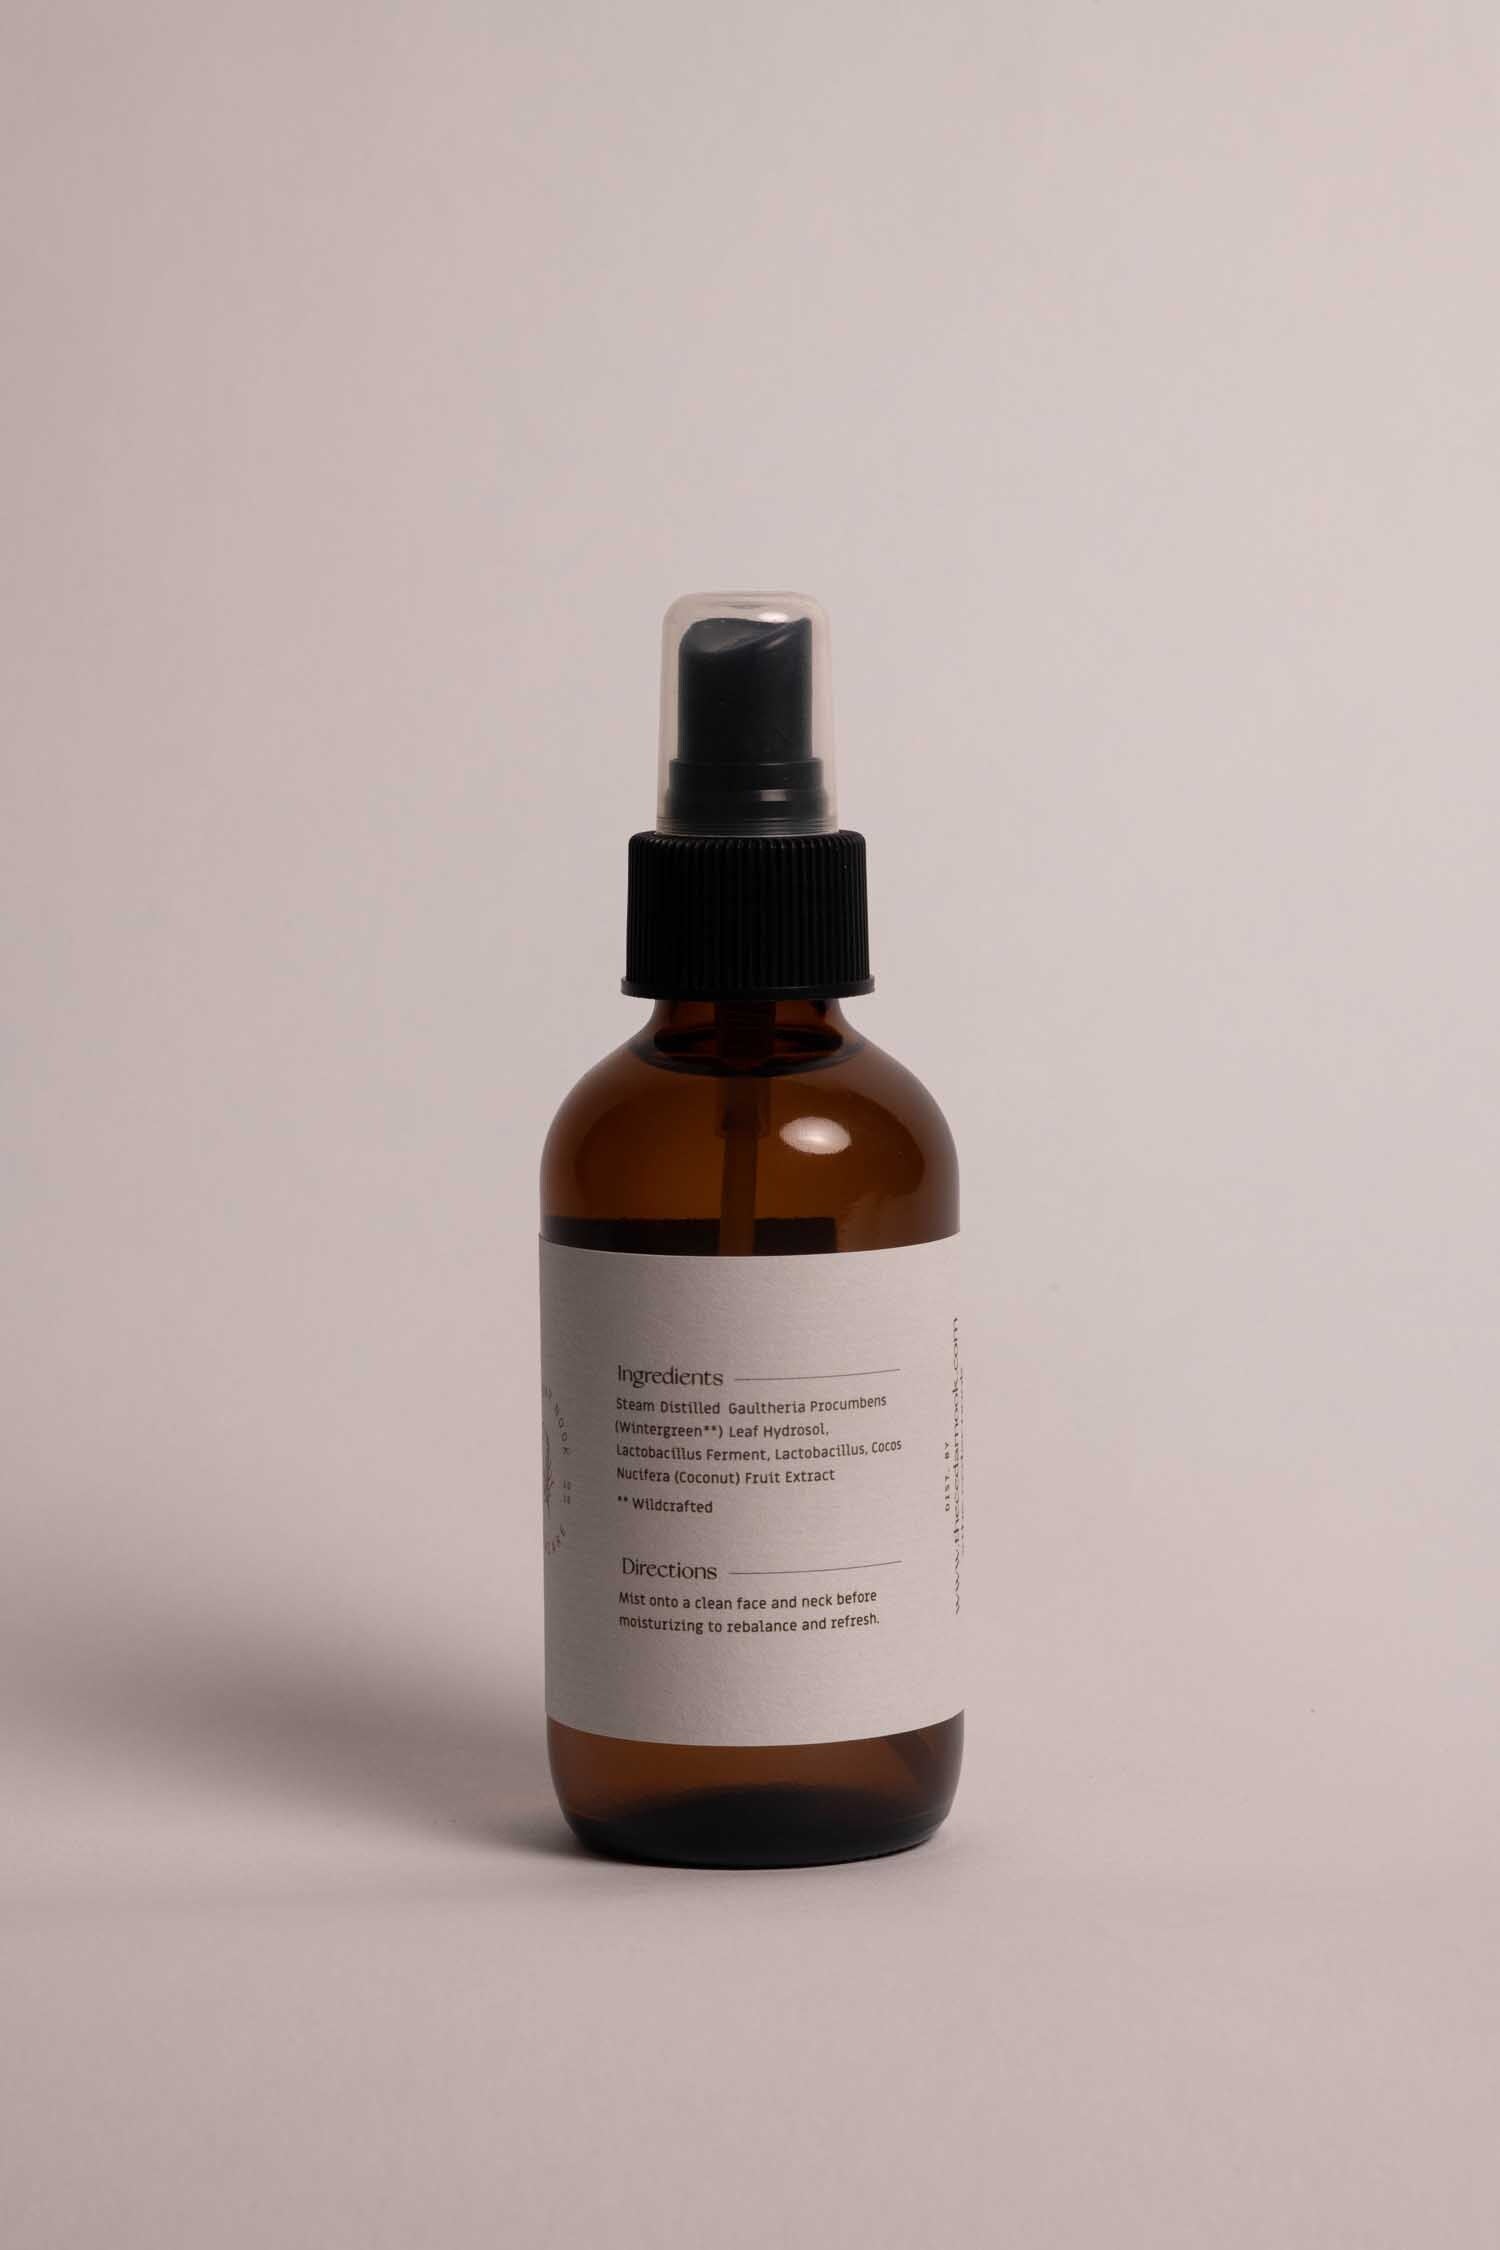 The Cedar Nook Wintergreen Face Toner in a 4 oz amber glass bottle with mist top back view, showing white label with list of ingredients and directions for use